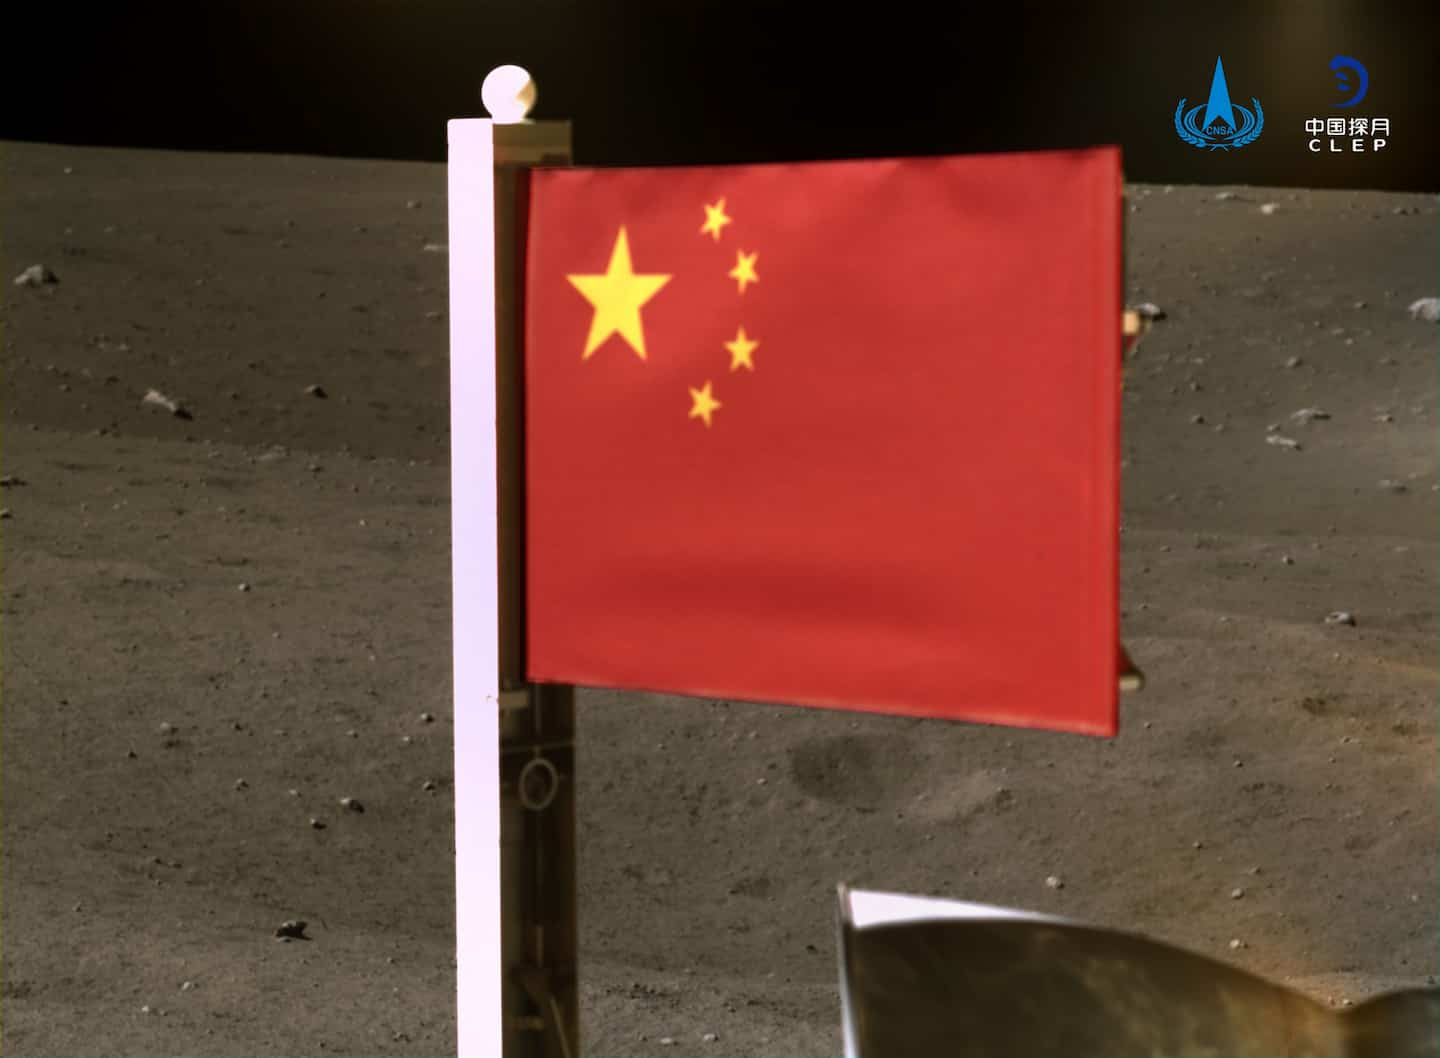 China could claim the Moon as one of its territories, NASA chief warns